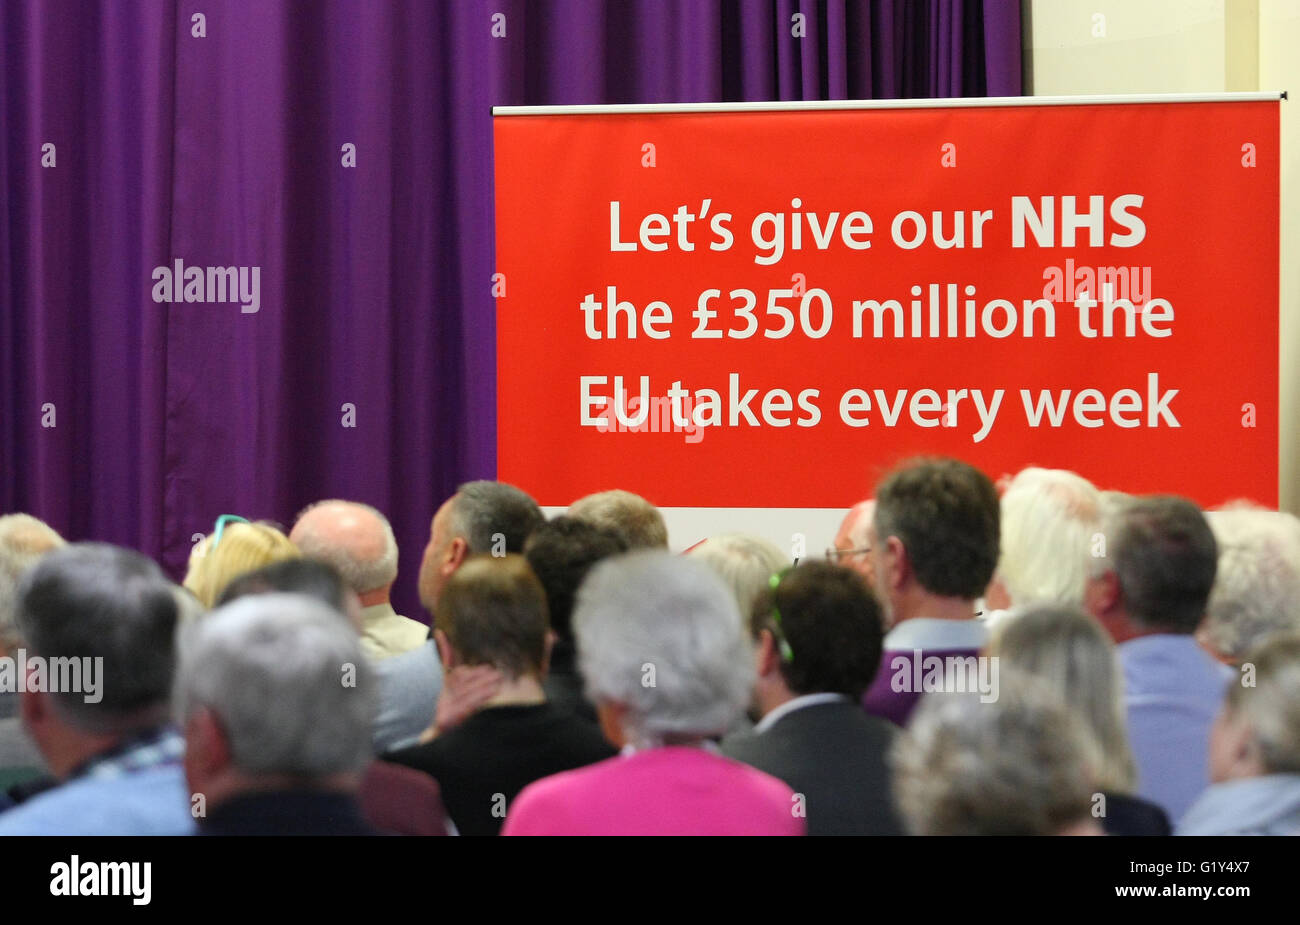 Newport, Isle of Wight, UK. 20th May, 2016. Crowds are delivered the message of giving £350 million to the NHS rather than the EU as they gather to hear Iain Duncan Smith MP and Andrew Turner MP speak at a Vote Leave rally at Christ the King College on the Isle of Wight Credit:  Darren Toogood/Alamy Live News Stock Photo